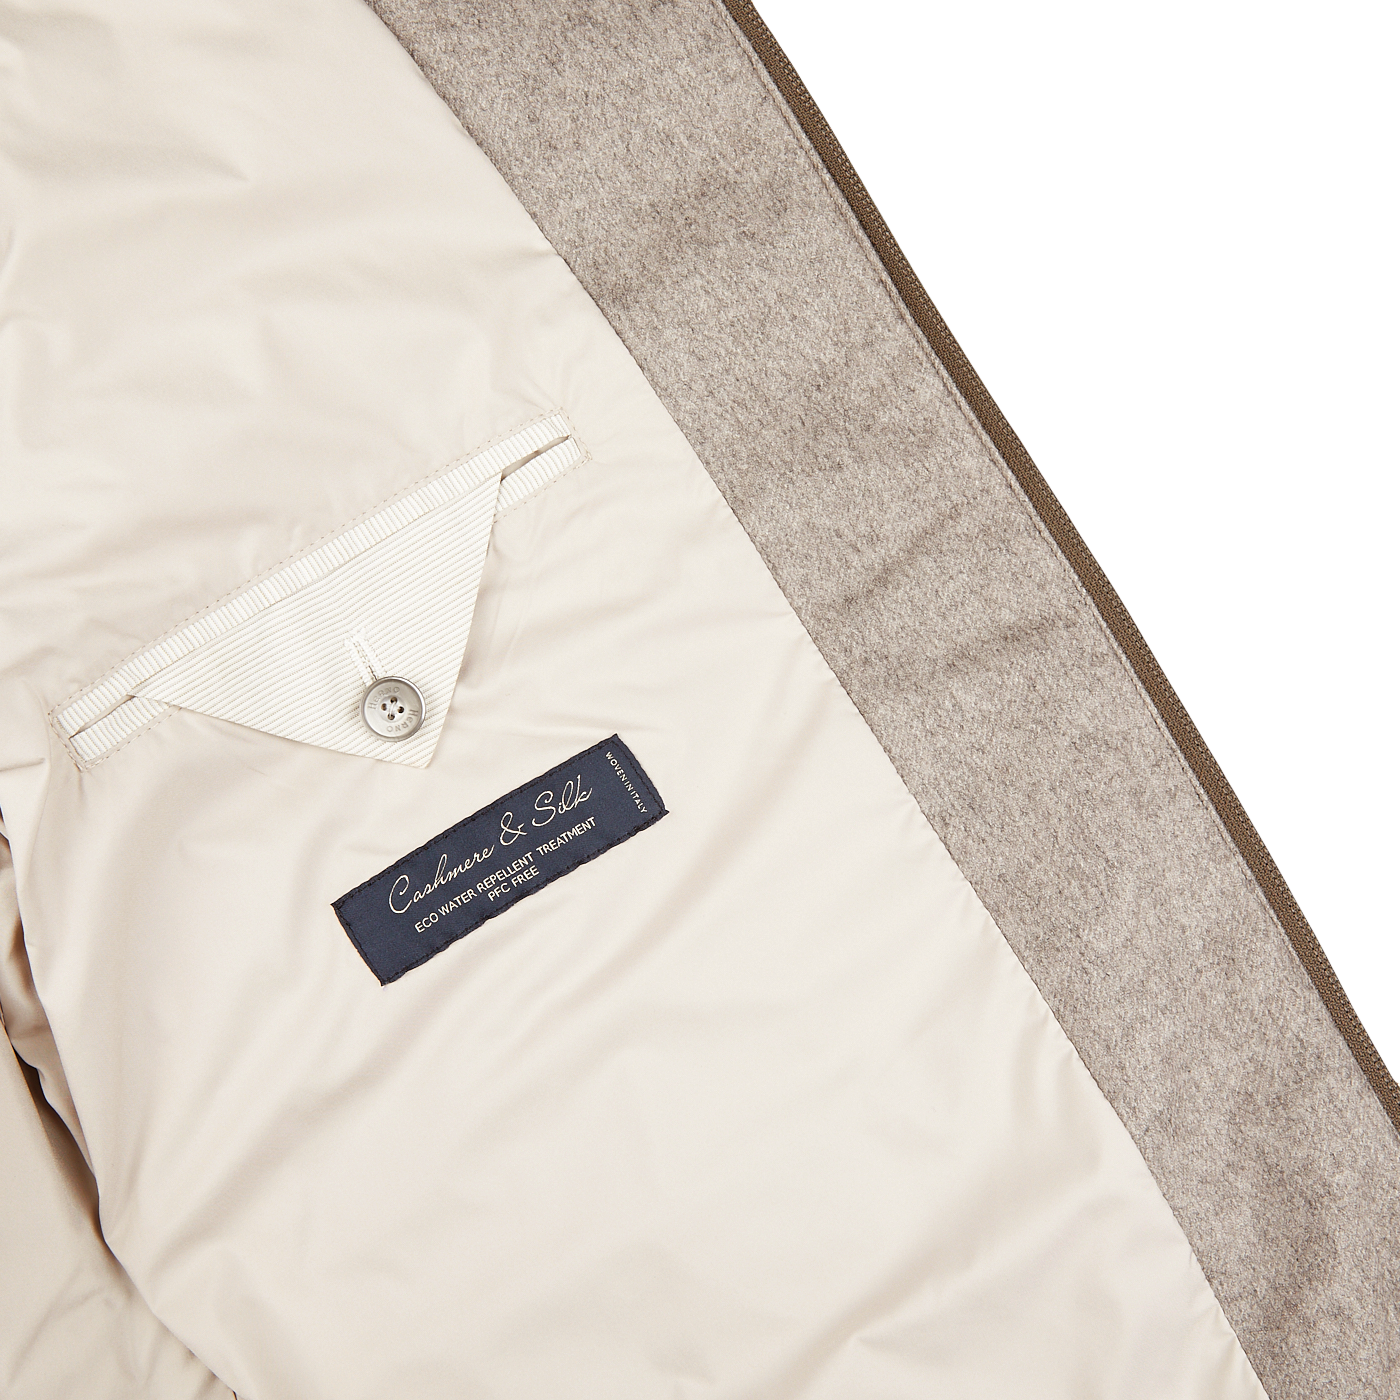 A Herno Taupe Beige Silk Cashmere Water-Repellent Jacket with a slim fit, featuring a label on the back.